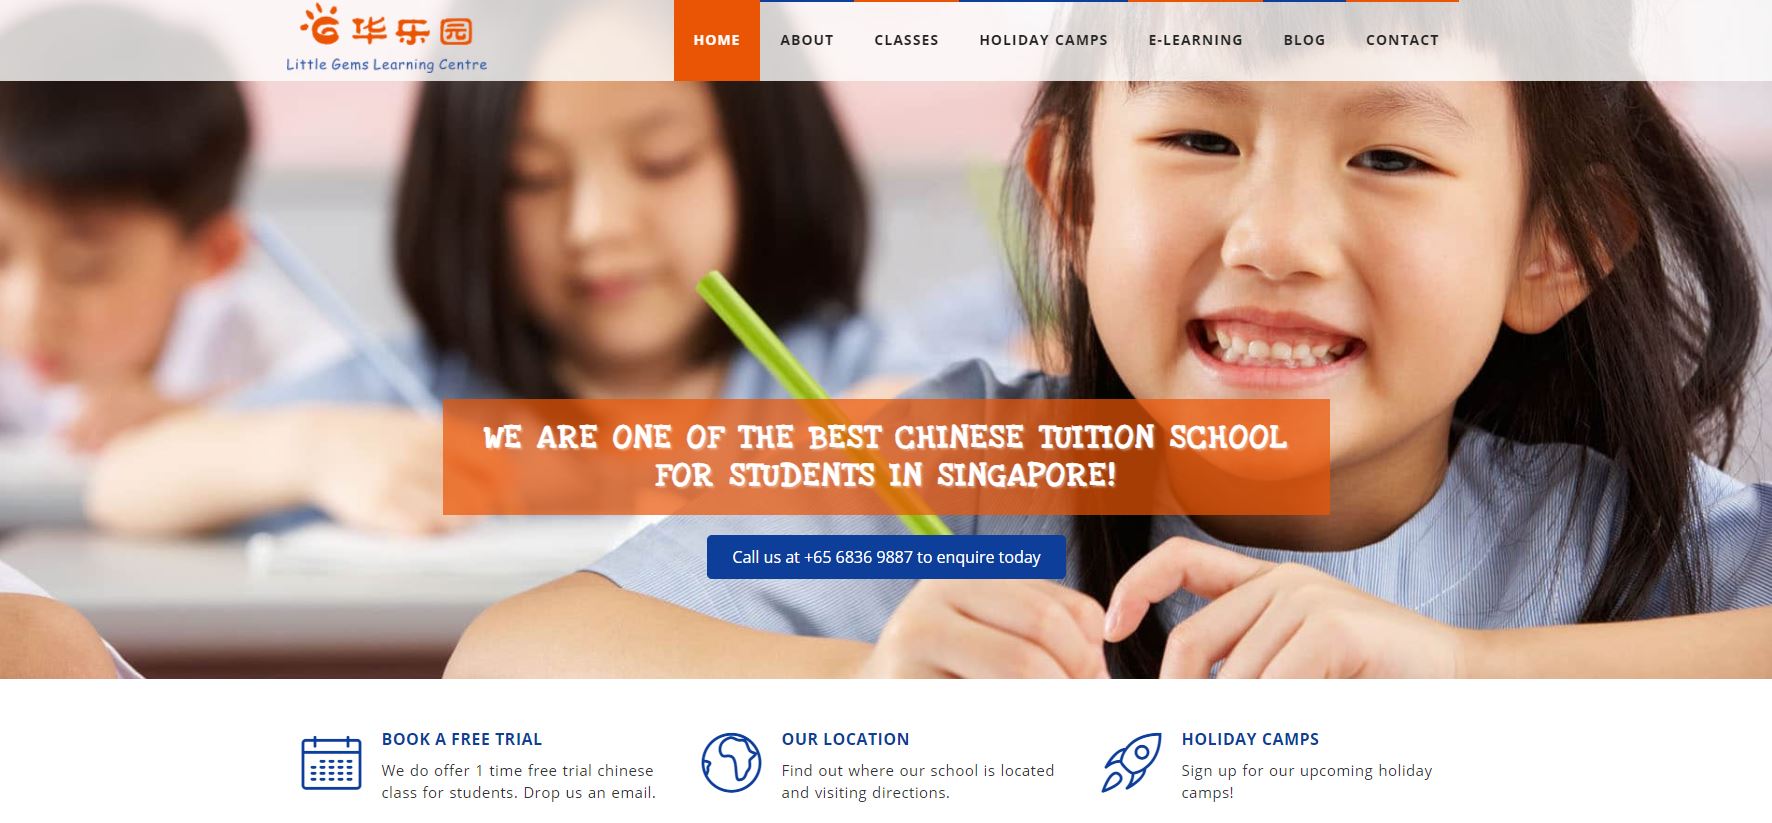 Little-Gems-Learning-Centre-Chinese-Tuition